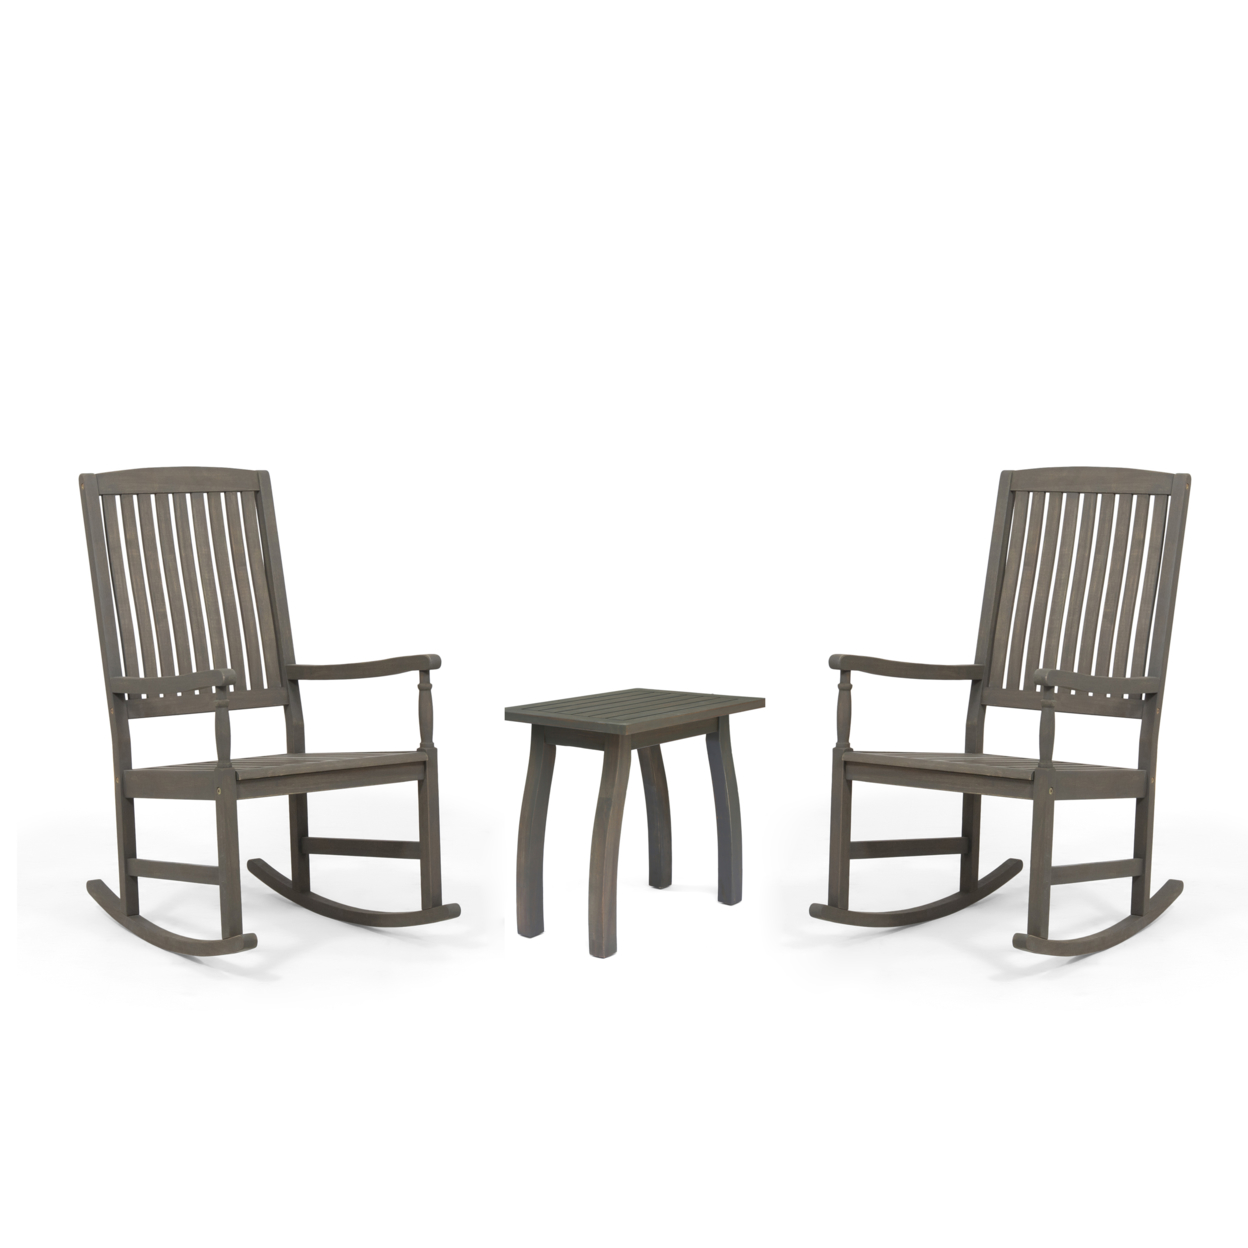 Verna Outdoor 2 Seater Acacia Wood Rocking Chairs And Side Table Set - Gray Finish